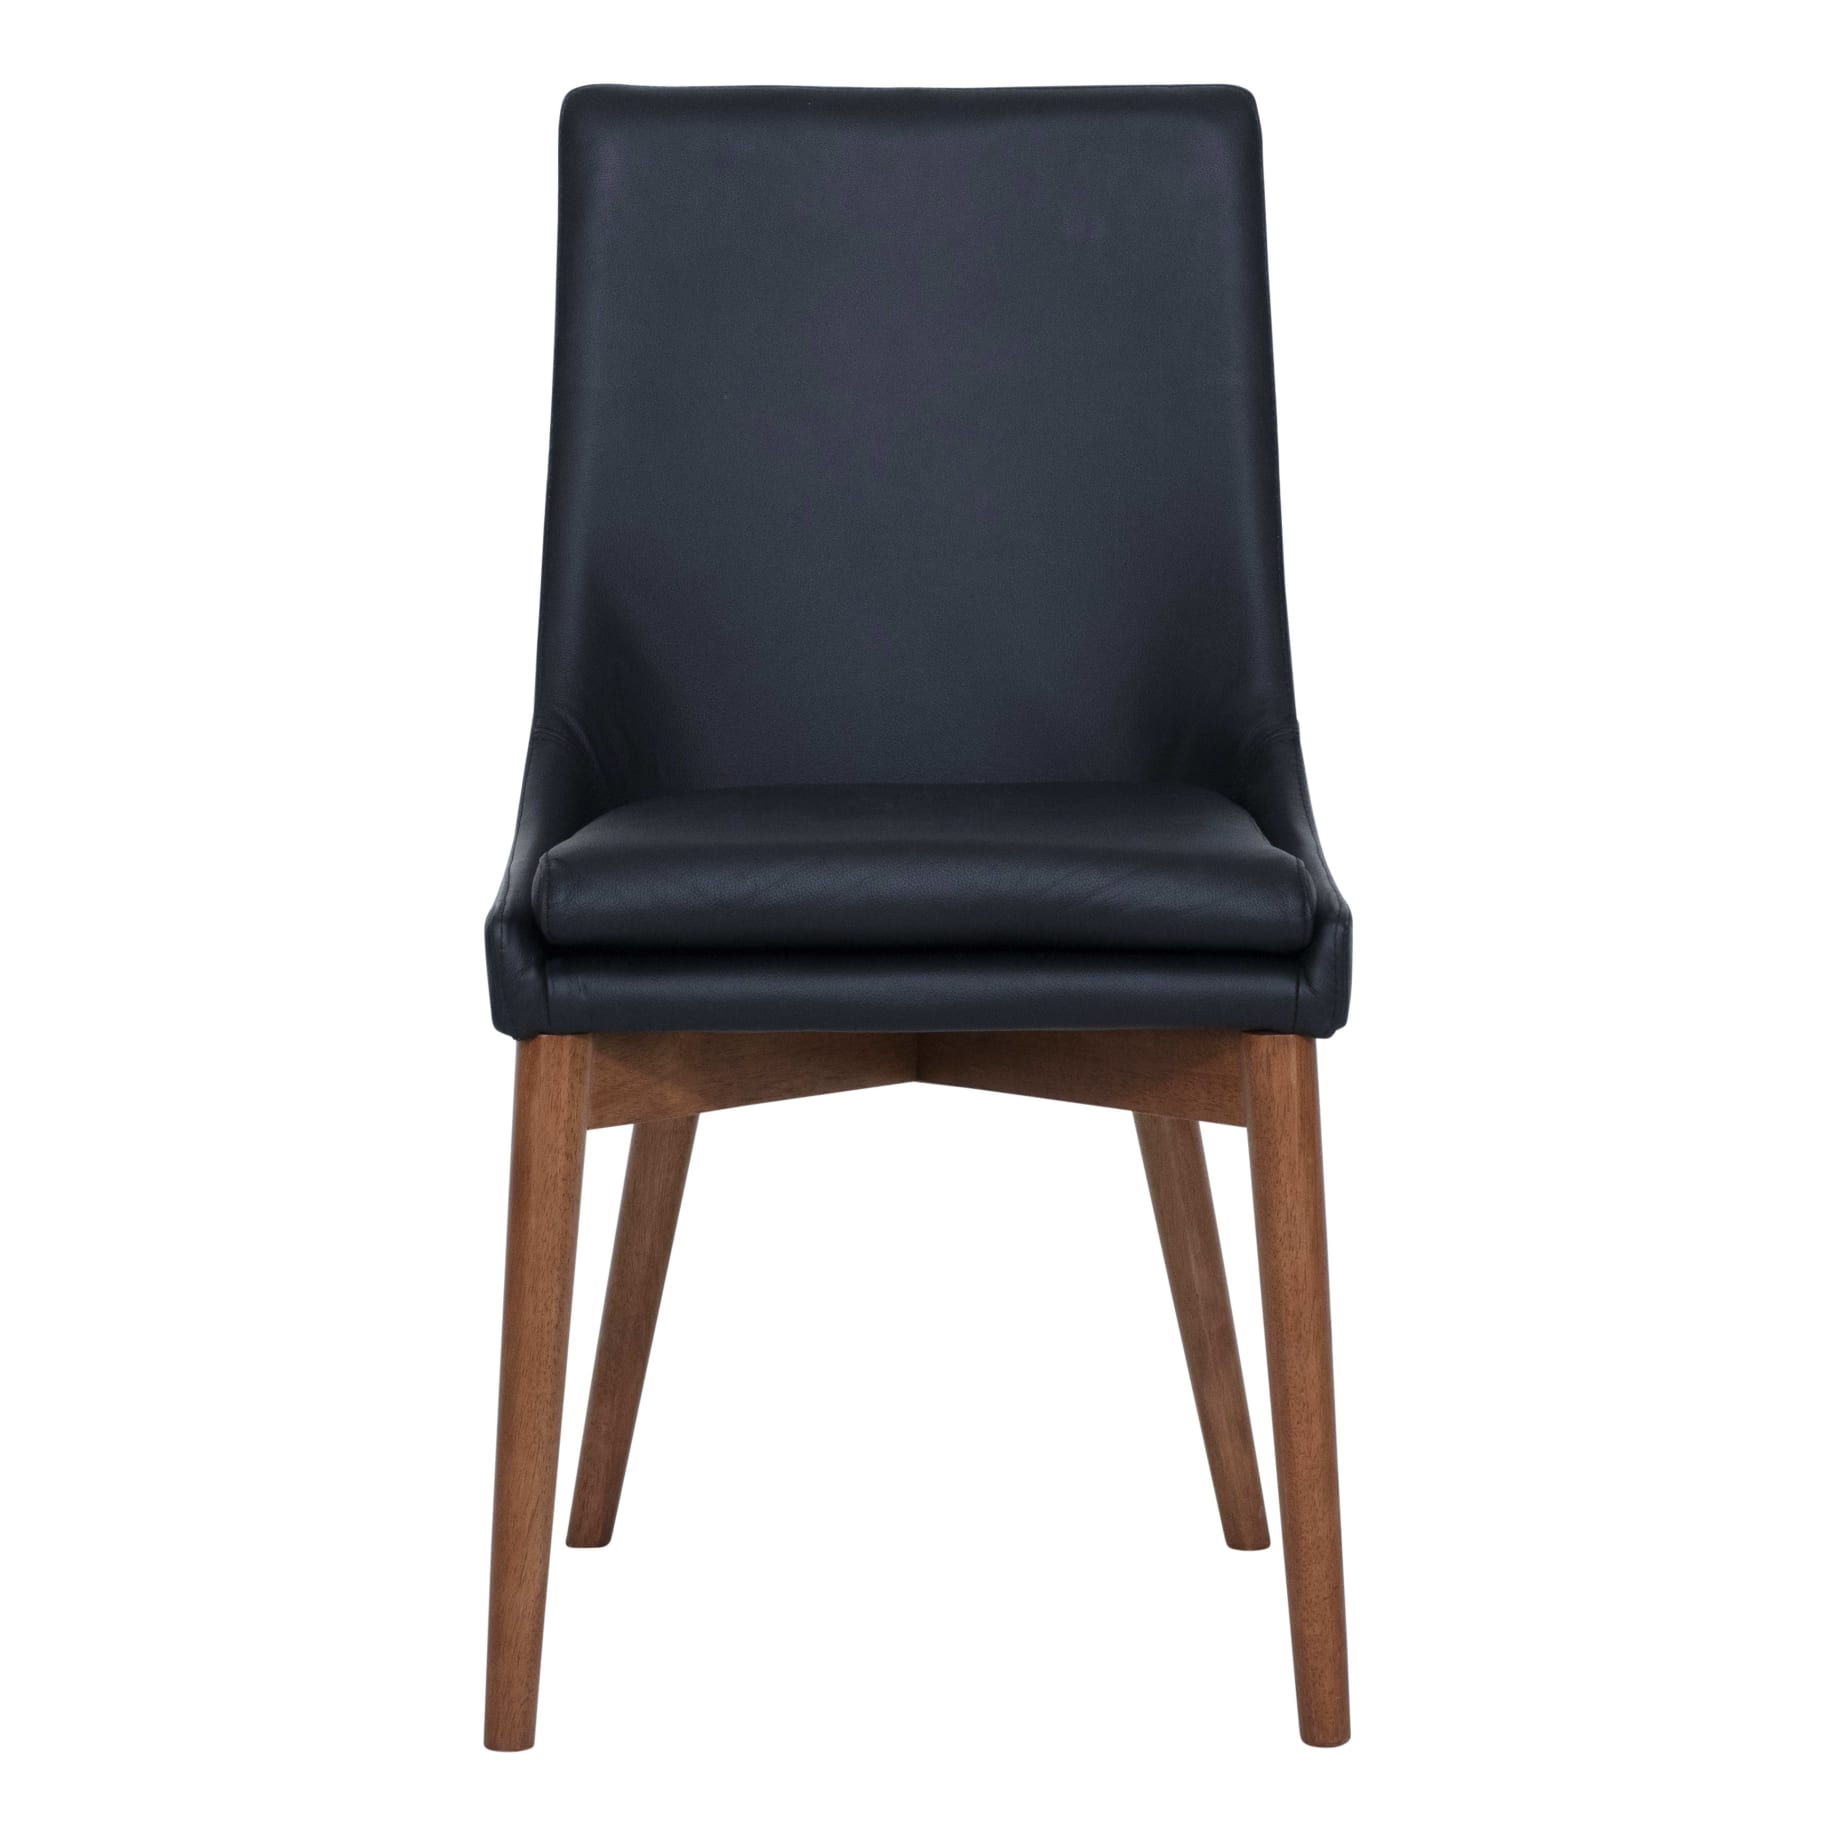 Highland Dining Chair in Leather Black / Blackwood Stain